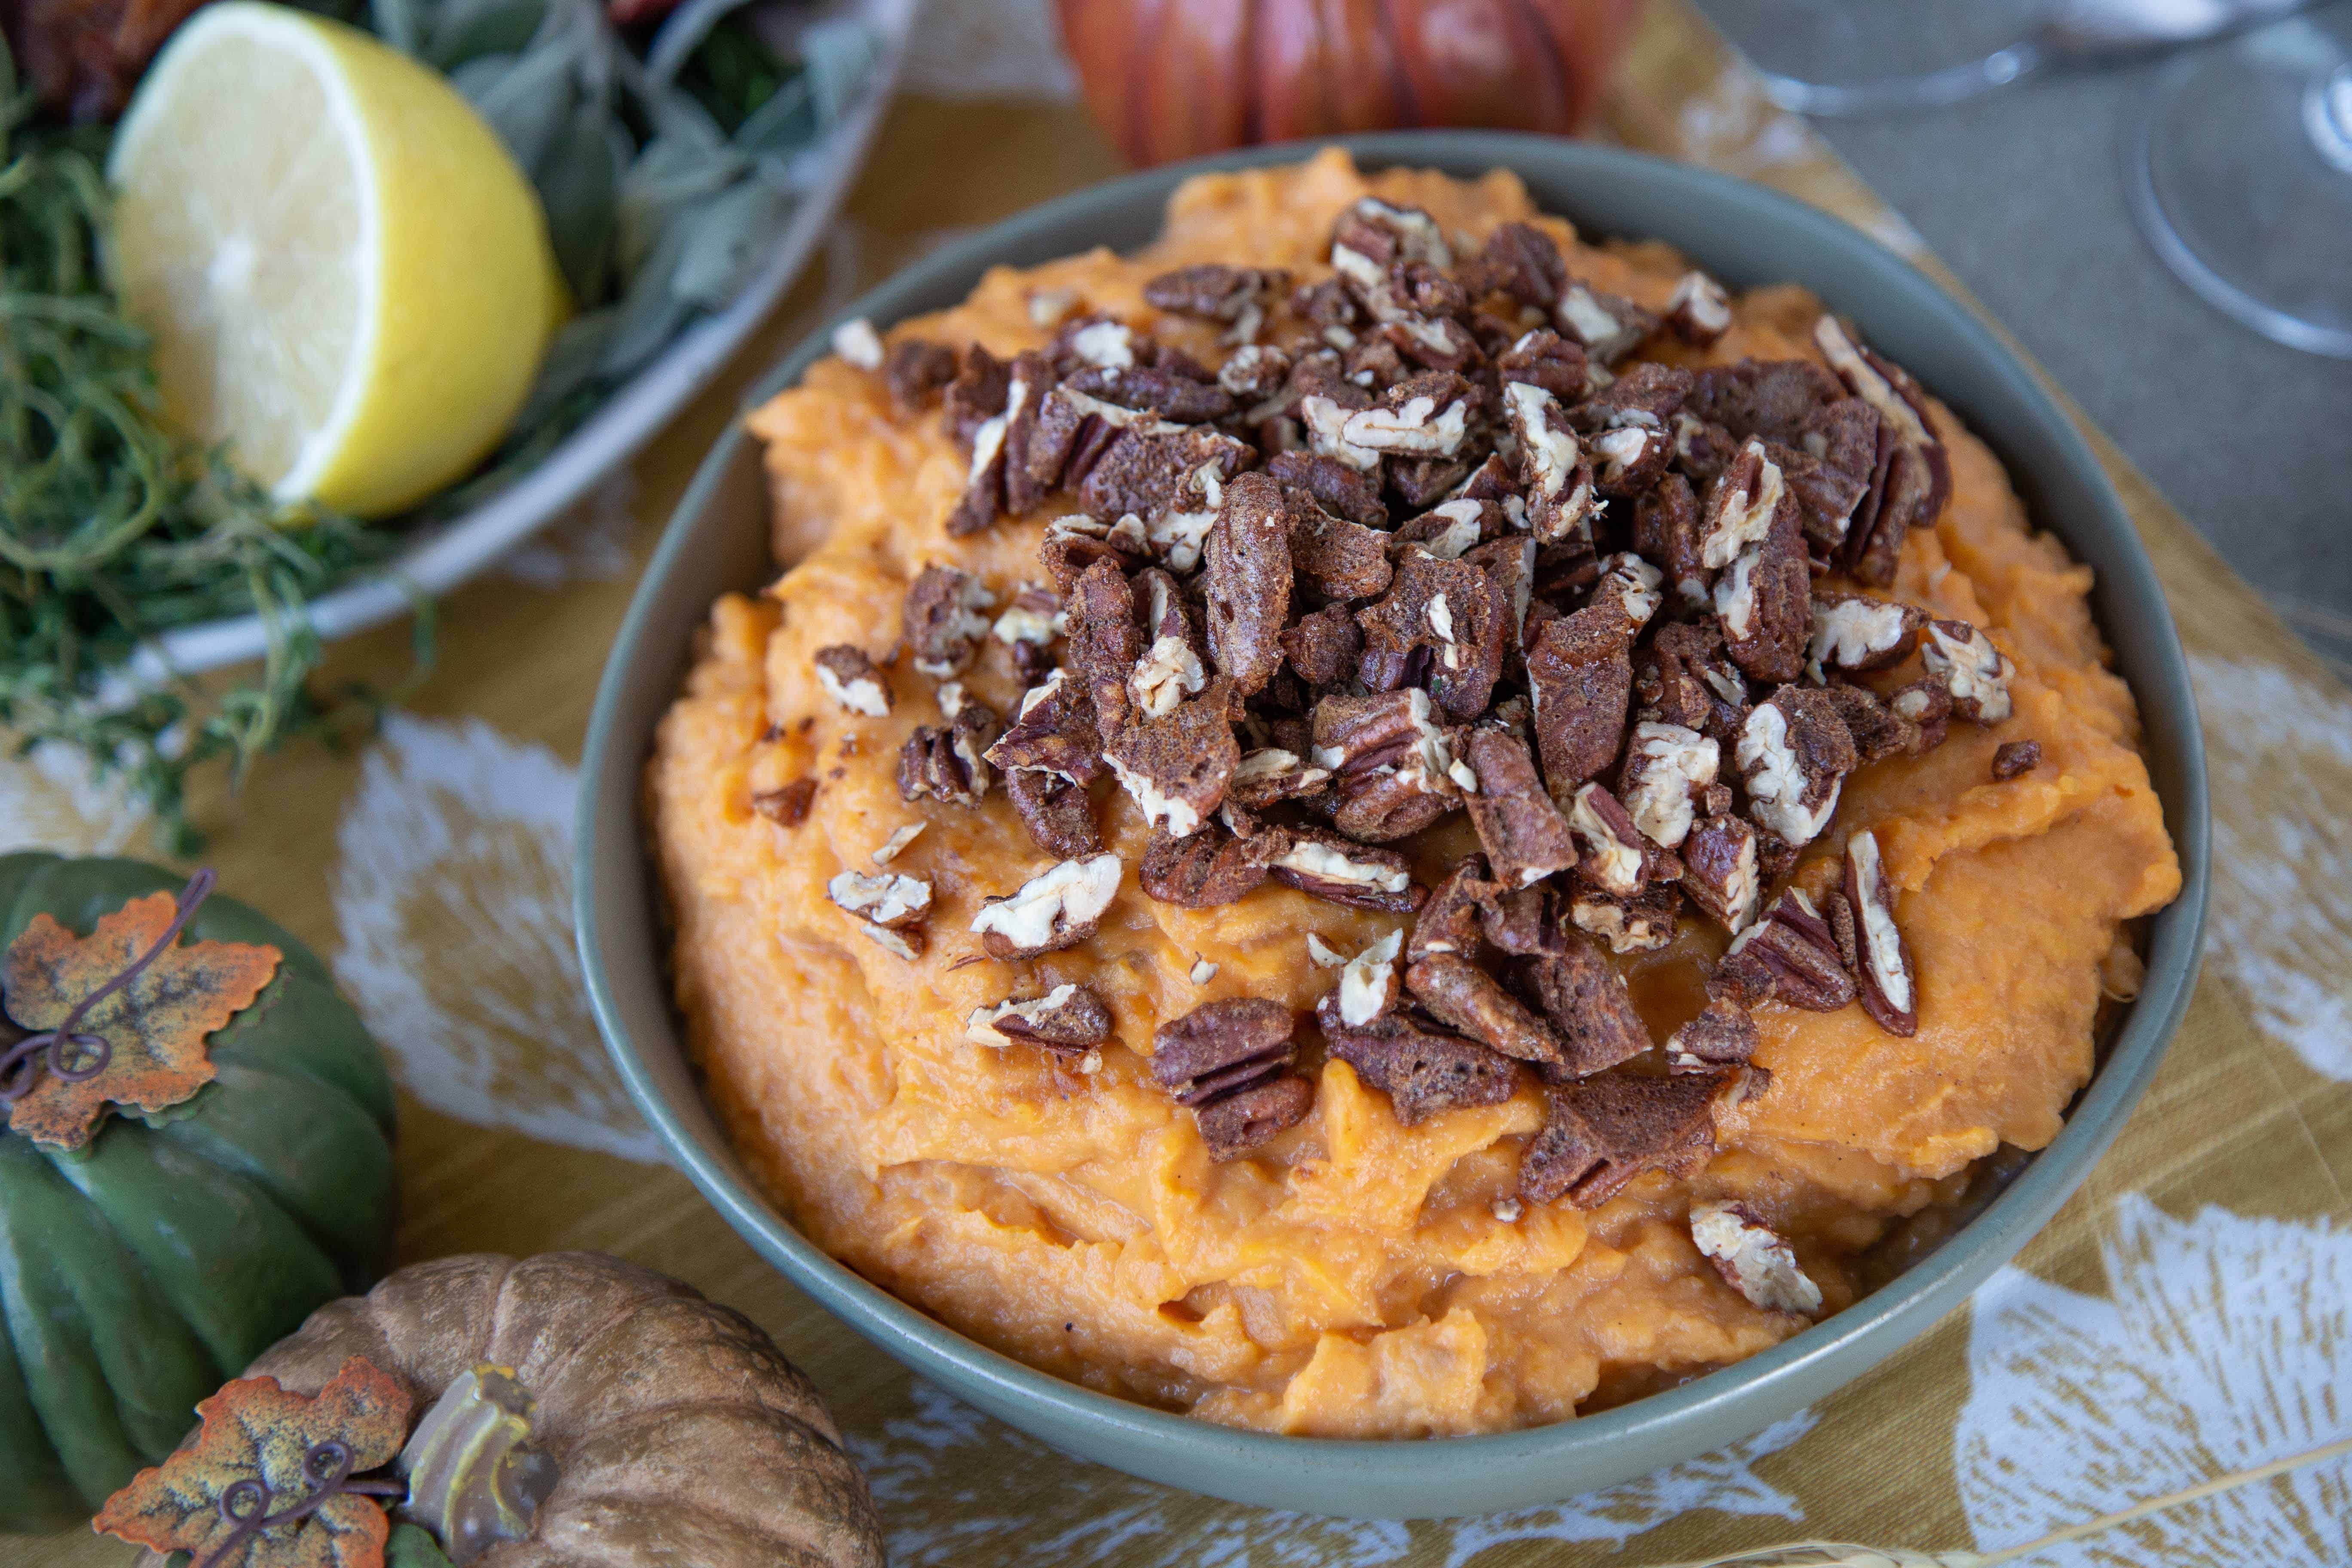 sweet potatoes topped with candied pecans in a green bowl on a thanksgiving table.